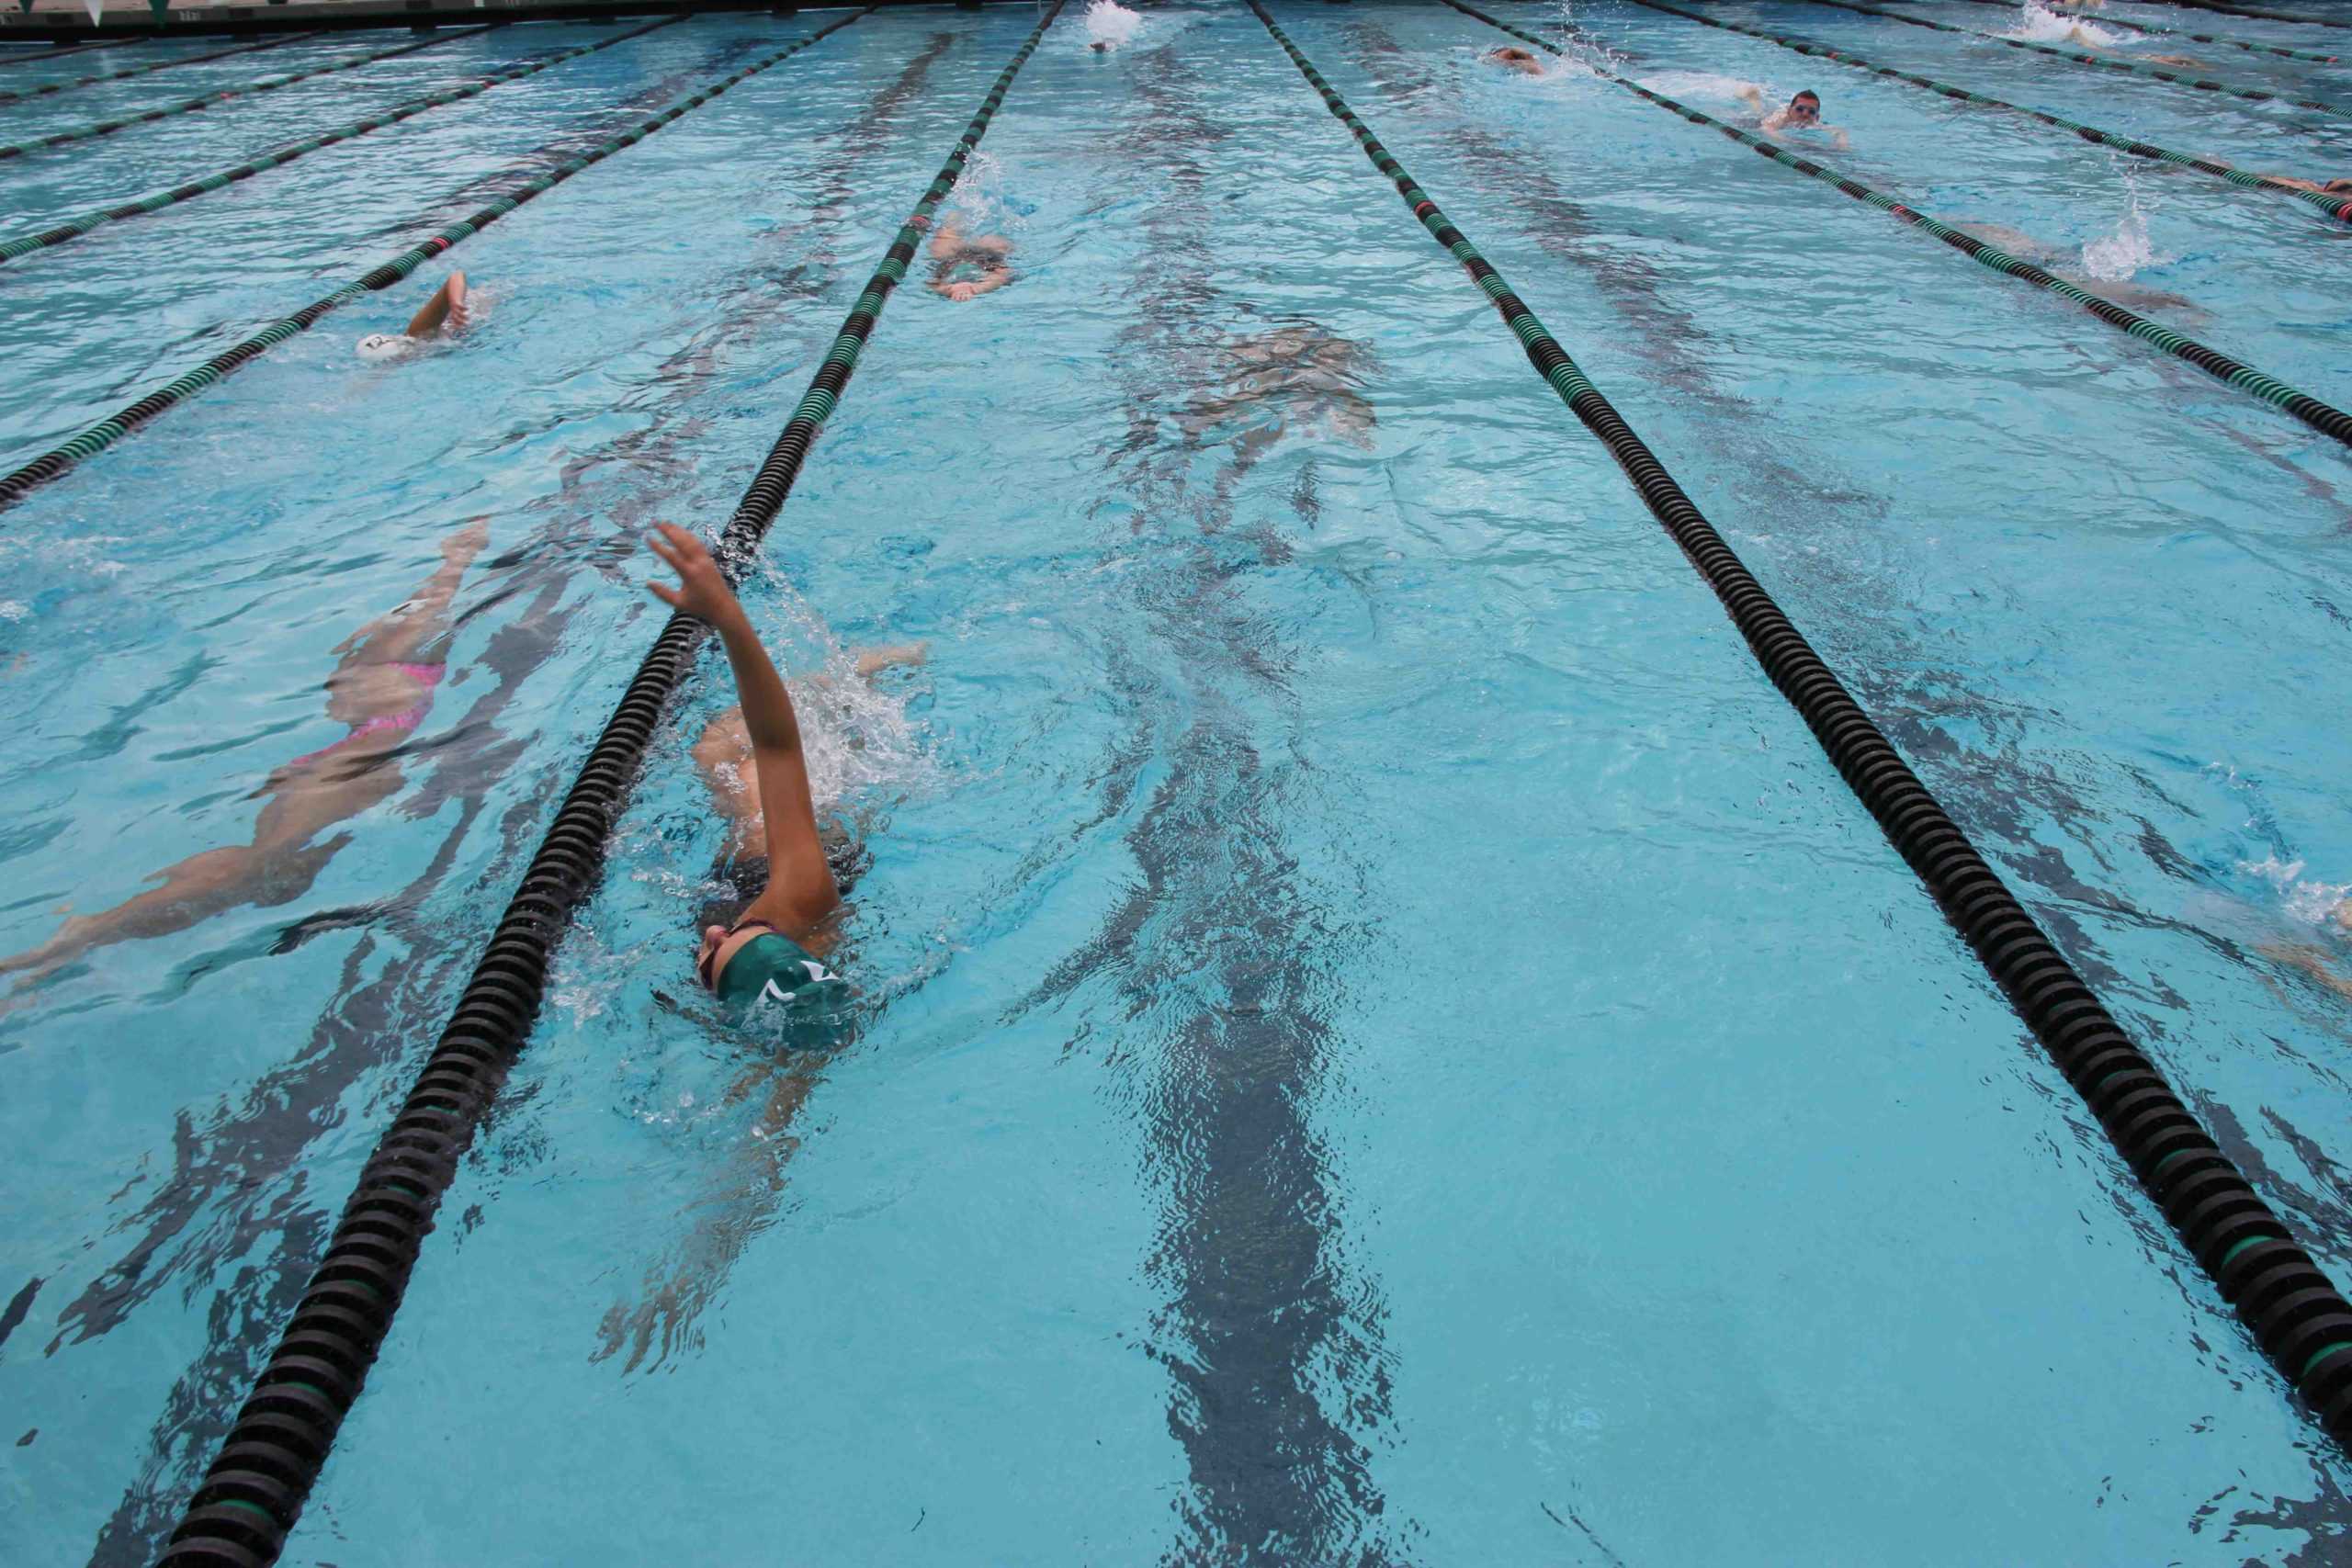 The girls swimming team starts the season off on a high note with two wins against Menlo School and Menlo-Atherton High School. The tri-meet did not count toward the league title, which Paly hopes to reclaim the league title from crosstown rival Henry M. Gunn High School, but is a good indication of the season ahead. 